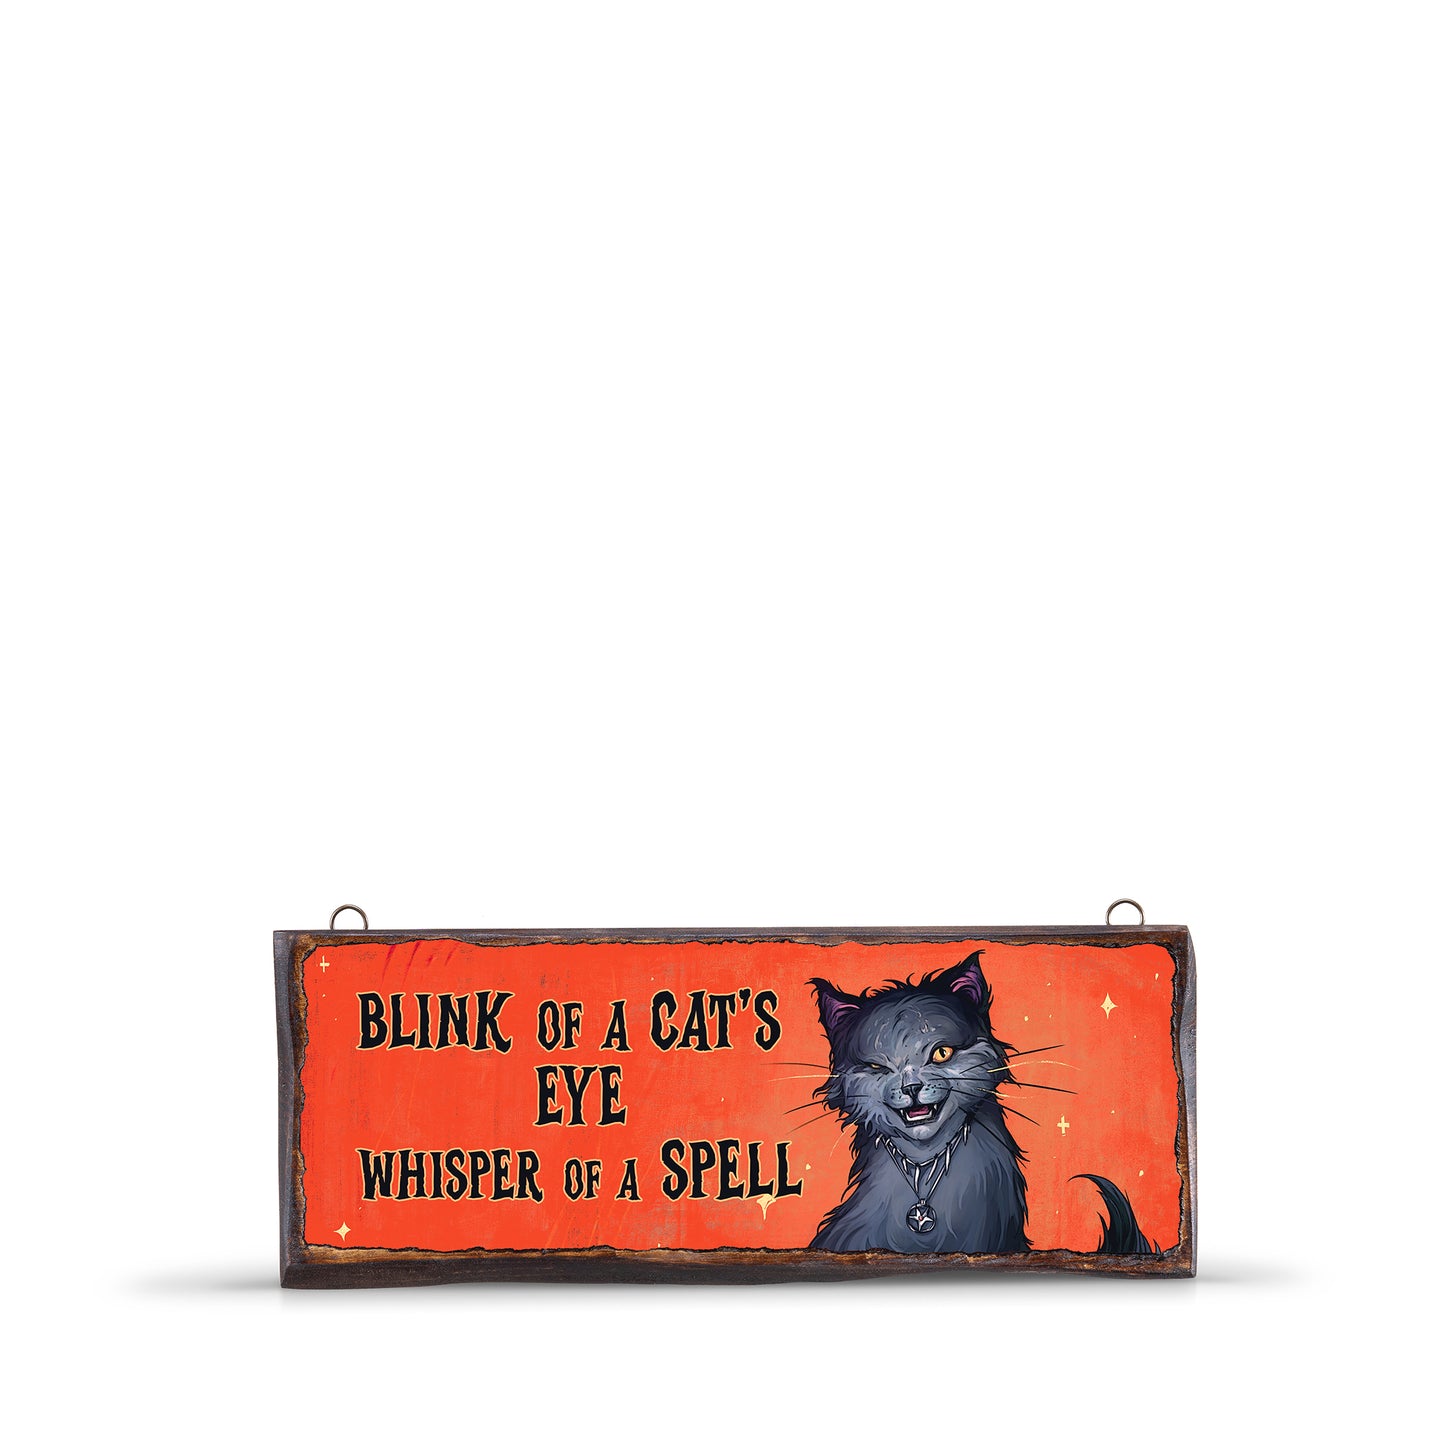 BLINK OF A CAT'S EYE WHISPER OF A SPELL WOODEN SIGN - WS042